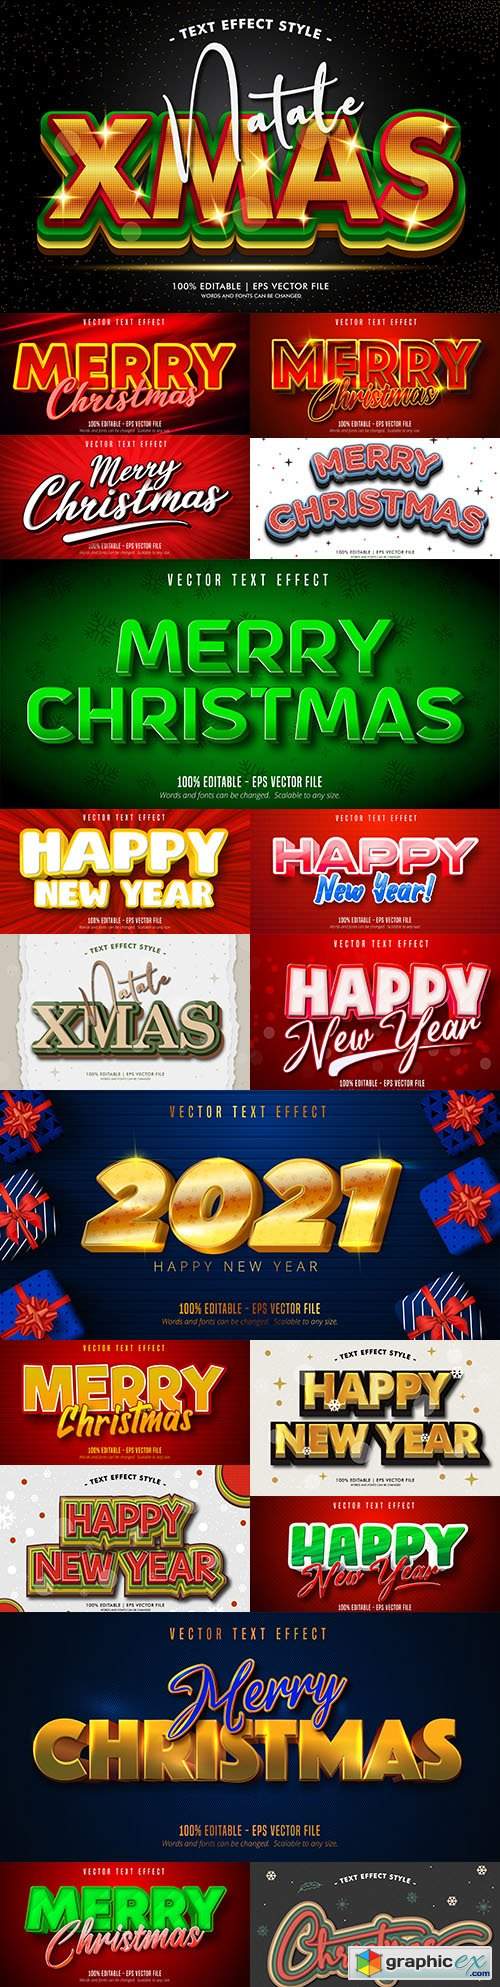  Merry Christmas editable font effect text collection 5 